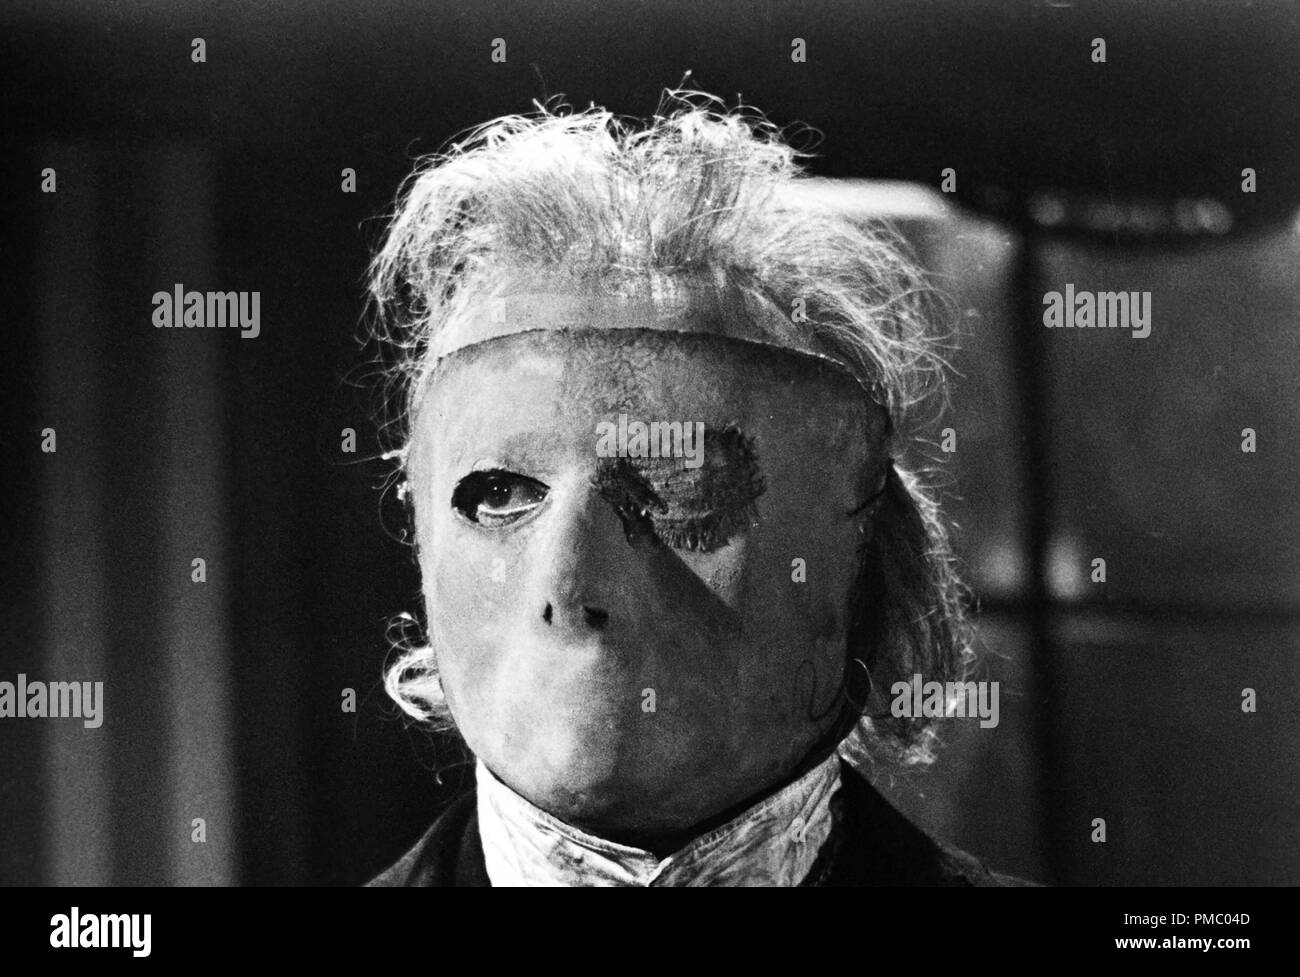 Herbert Lom, 'The Phantom of the Opera' 1962 Hammer Film Productions. Directed by Terence Fisher  File Reference # 33480 725THA Stock Photo